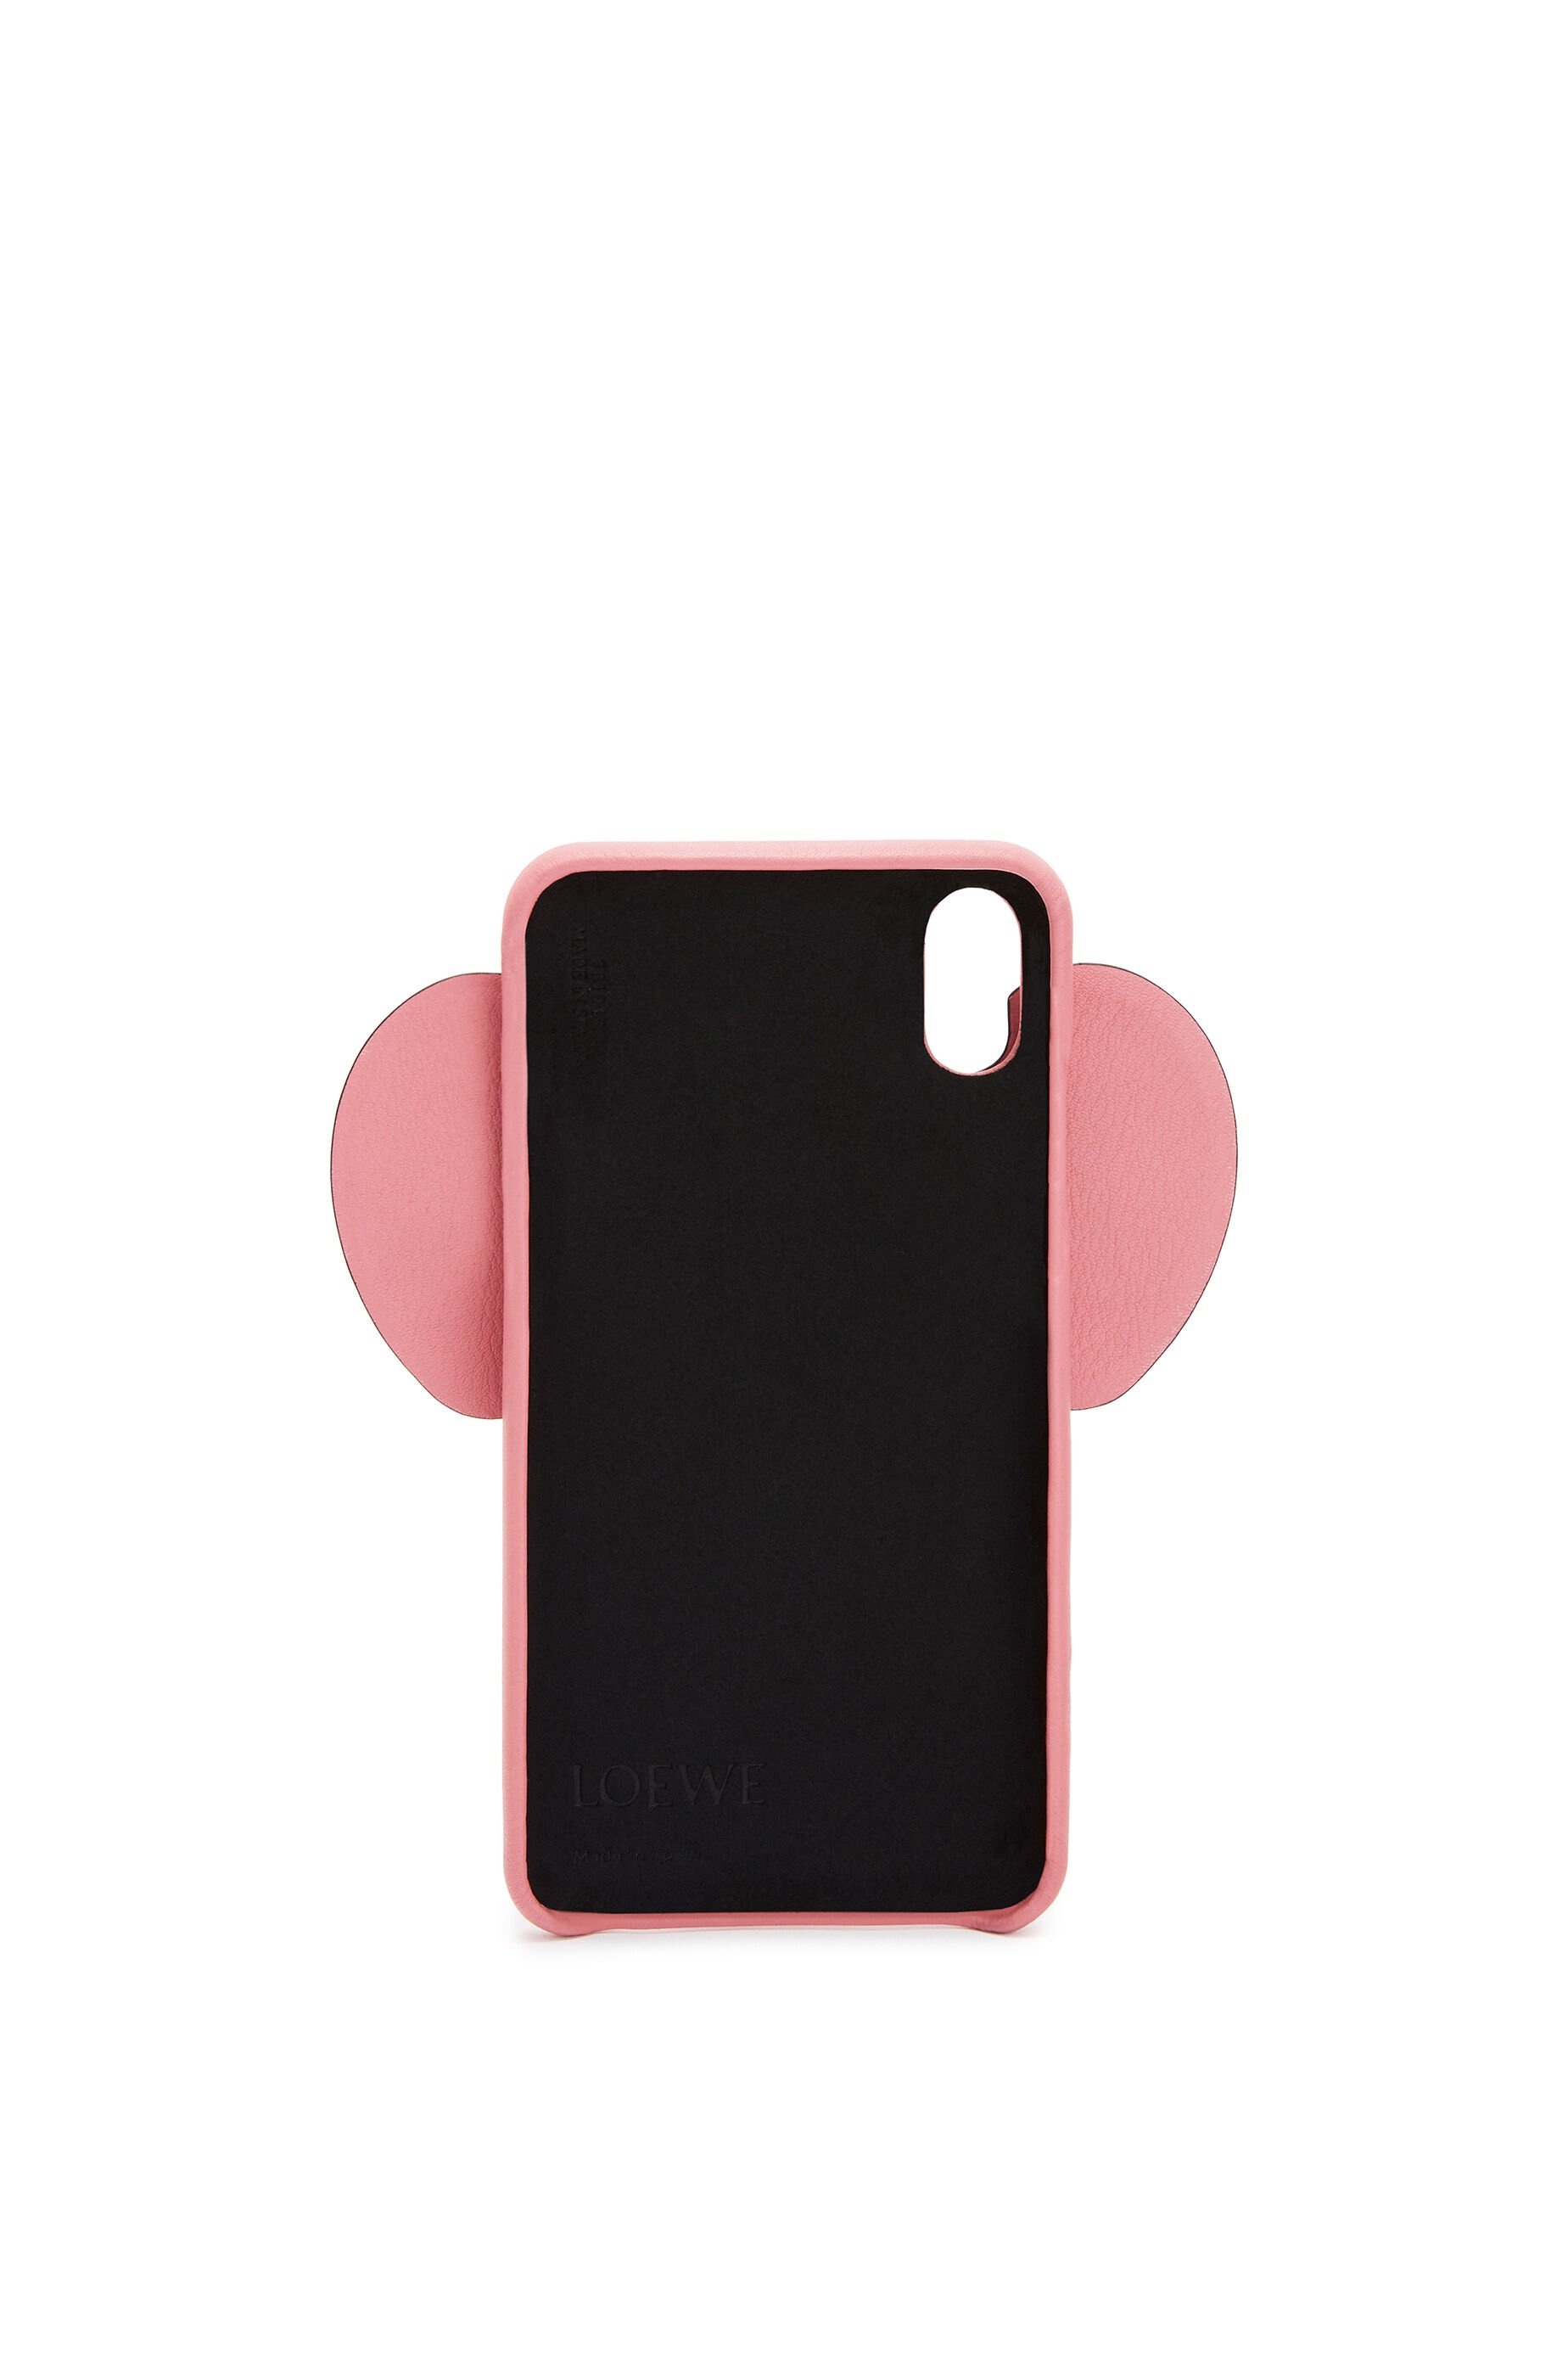 Elephant cover for iPhone XS Max in classic calfskin - 3